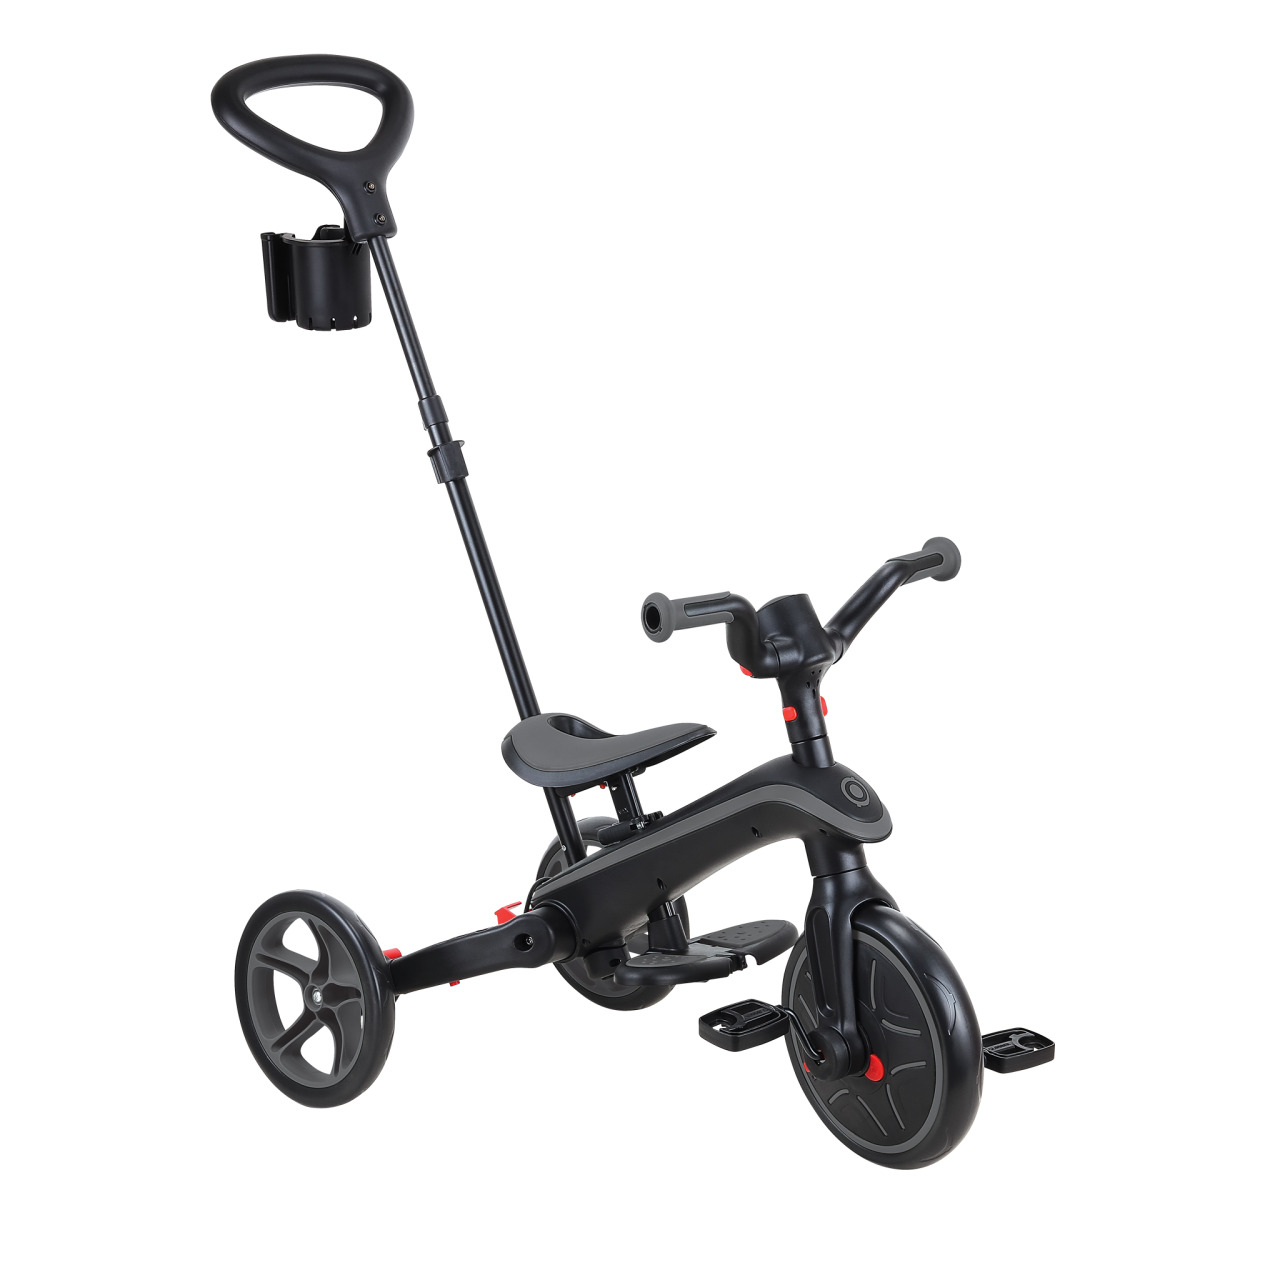 732 120 Foldable Tricycle With Push Handle